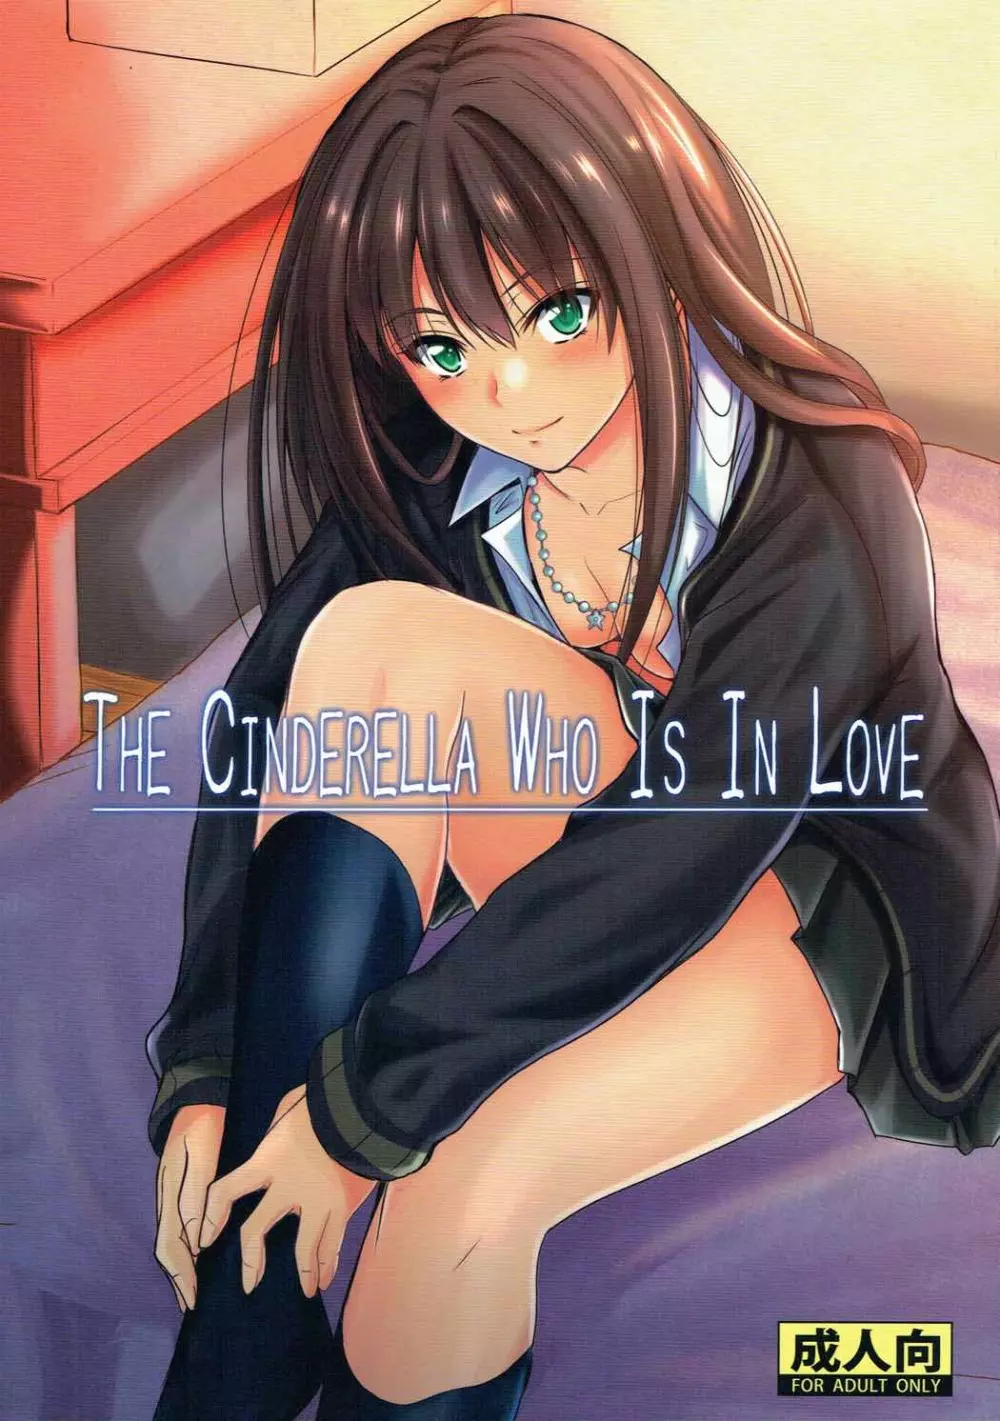 THE CINDERELLA WHO IS IN LOVE